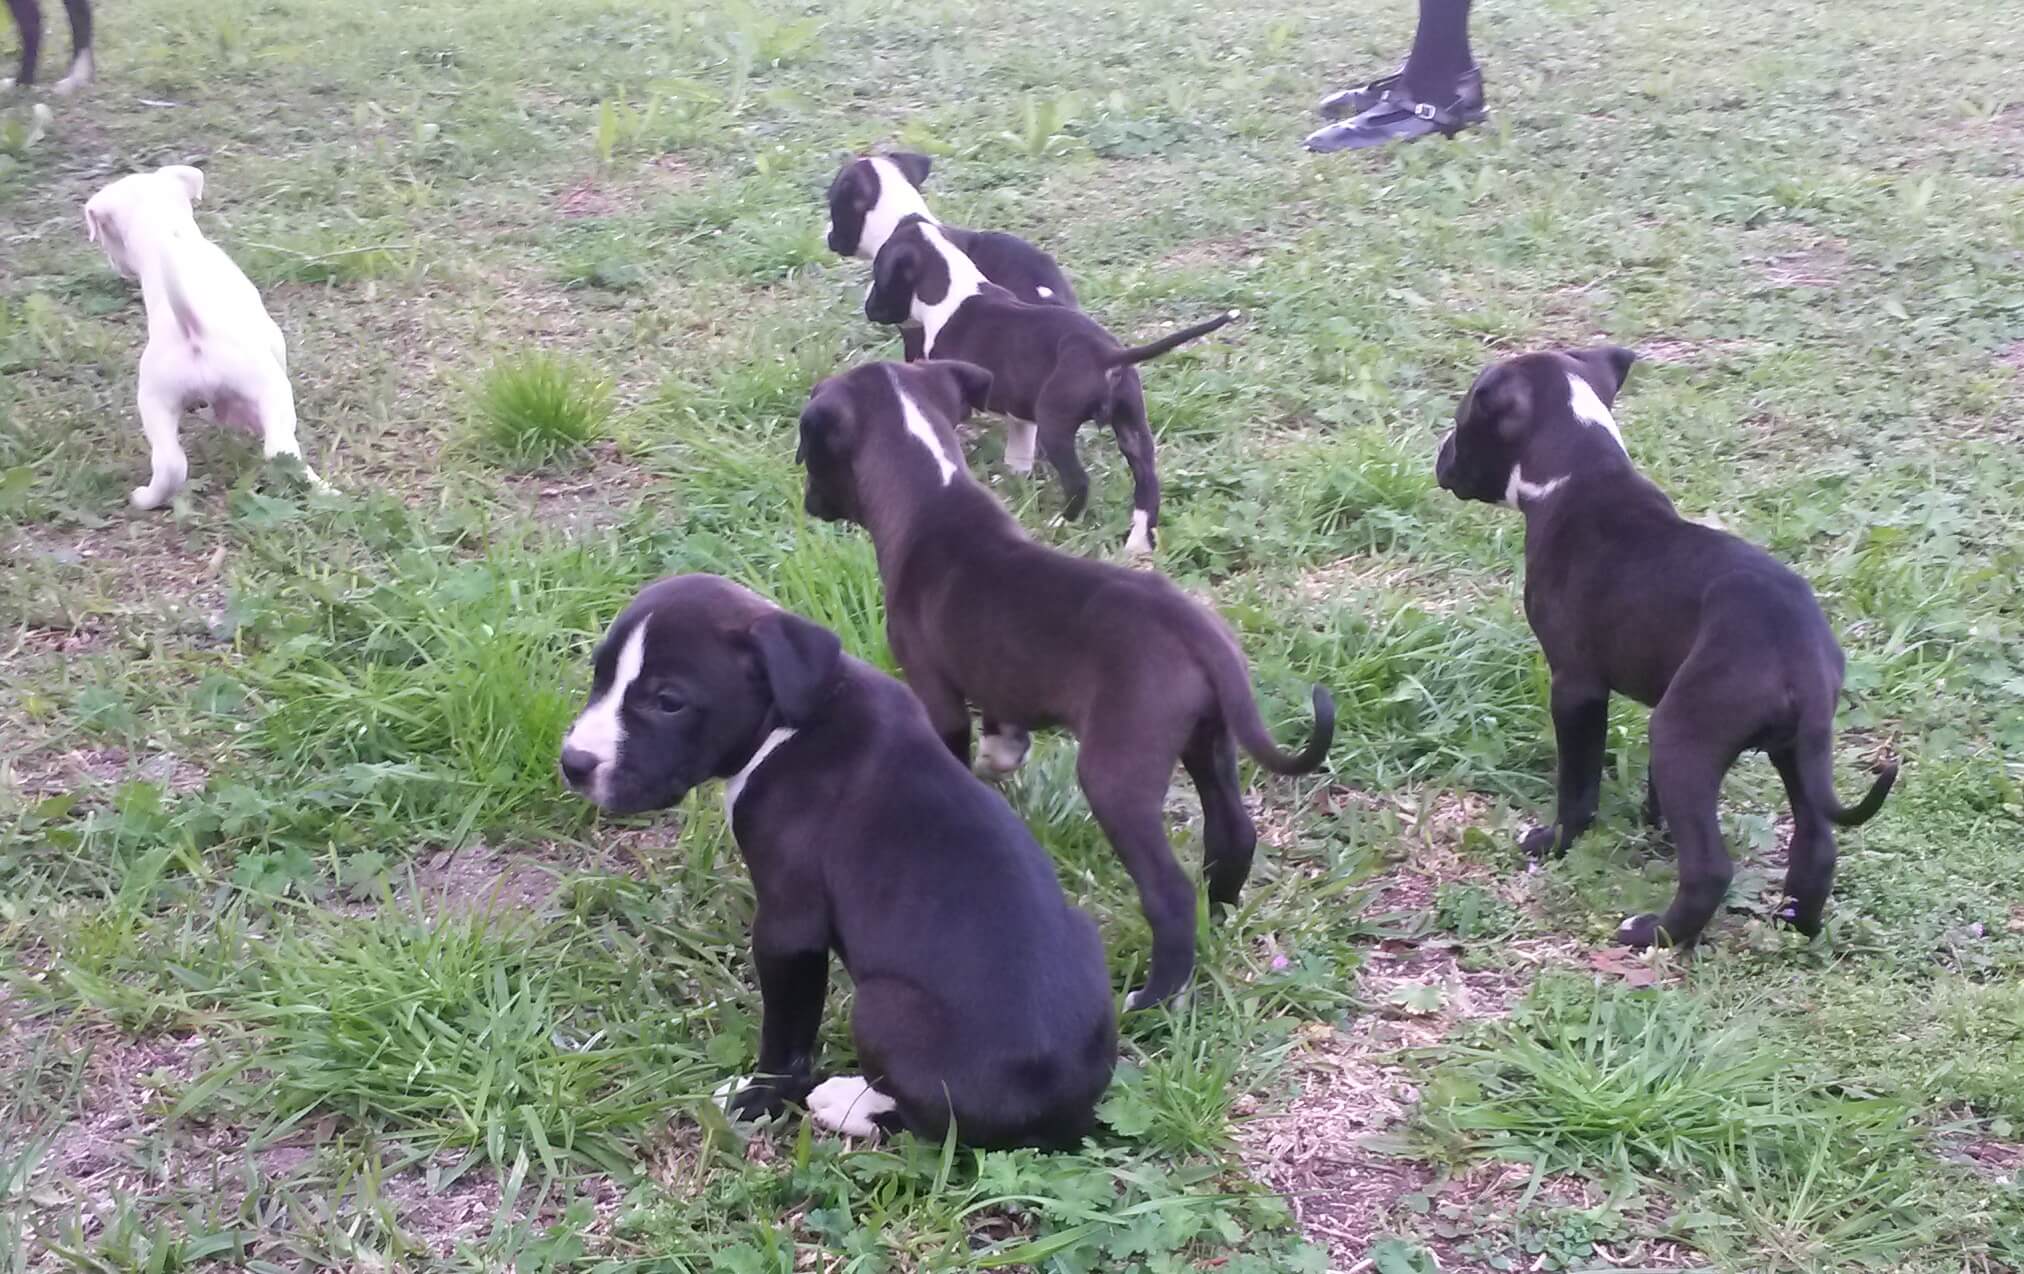 Pitbull Puppies for Sale in Cape Town by Hishaam Nordien